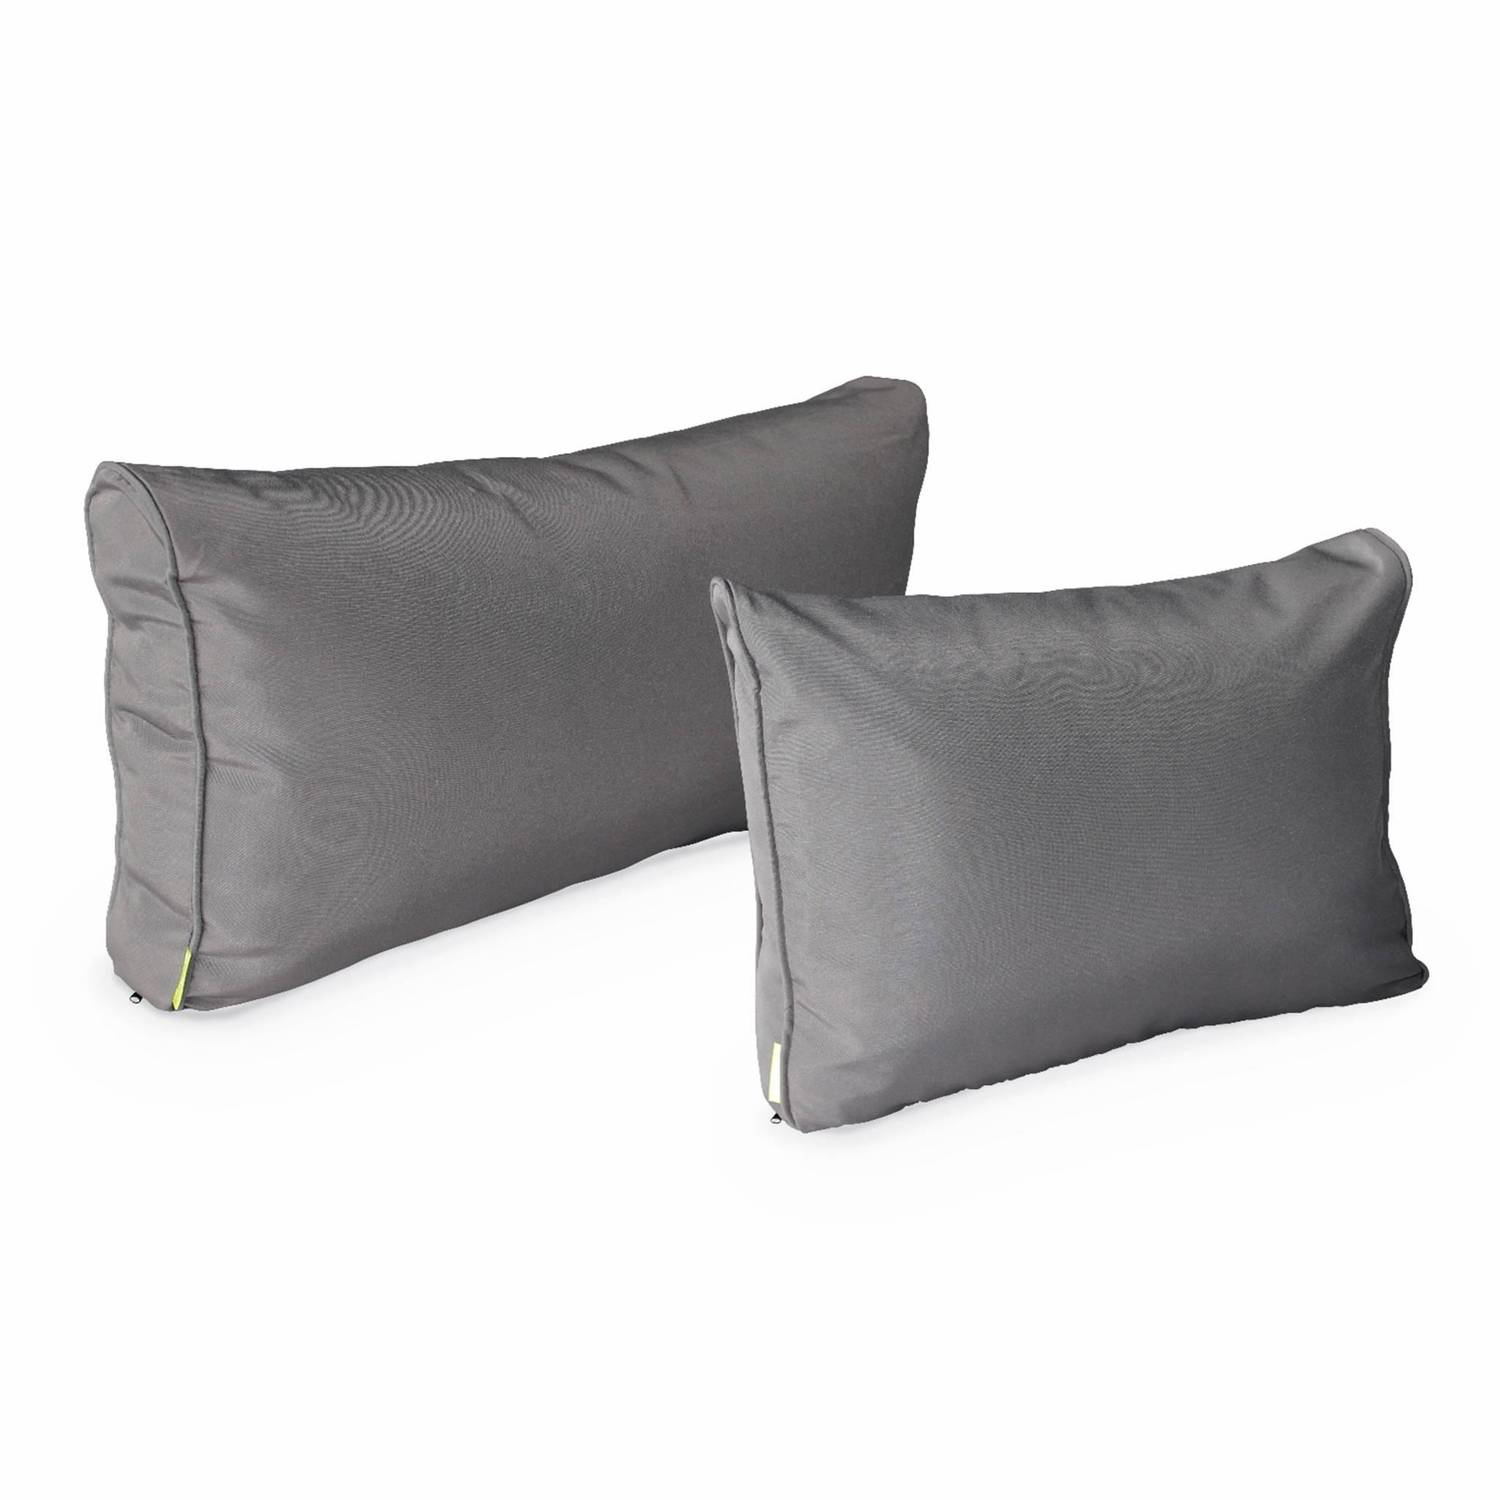 Complete set of cushion covers - Napoli - Grey Photo3